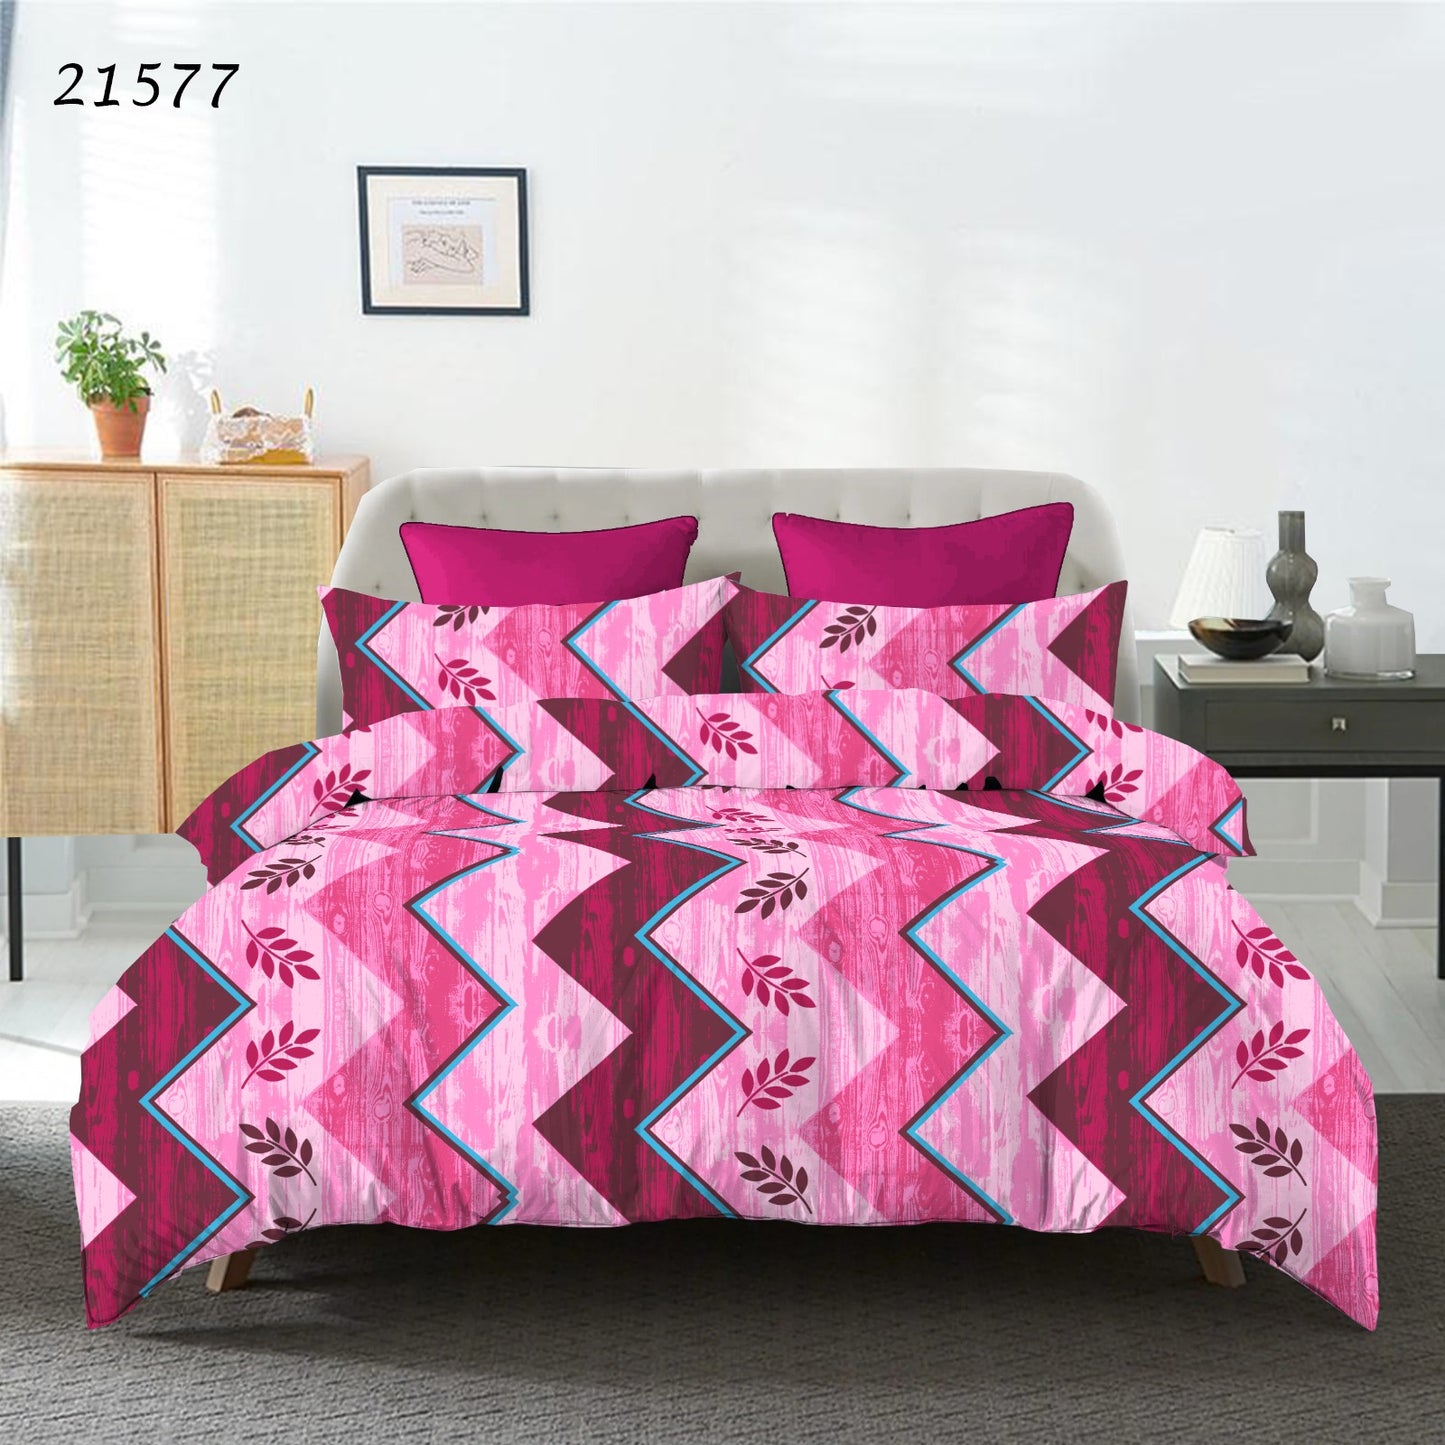 Jubliee Dreams, Double or Queen Bed 100% Pure Cotton Flat Bedsheet with 2 Matching Pillow Covers | 250 Thread Count (90 x 100 Inches)| for Bedroom, Study, Decor, Gifting, Wedding, Festivals- Zig-Zag Geometrical Pattern